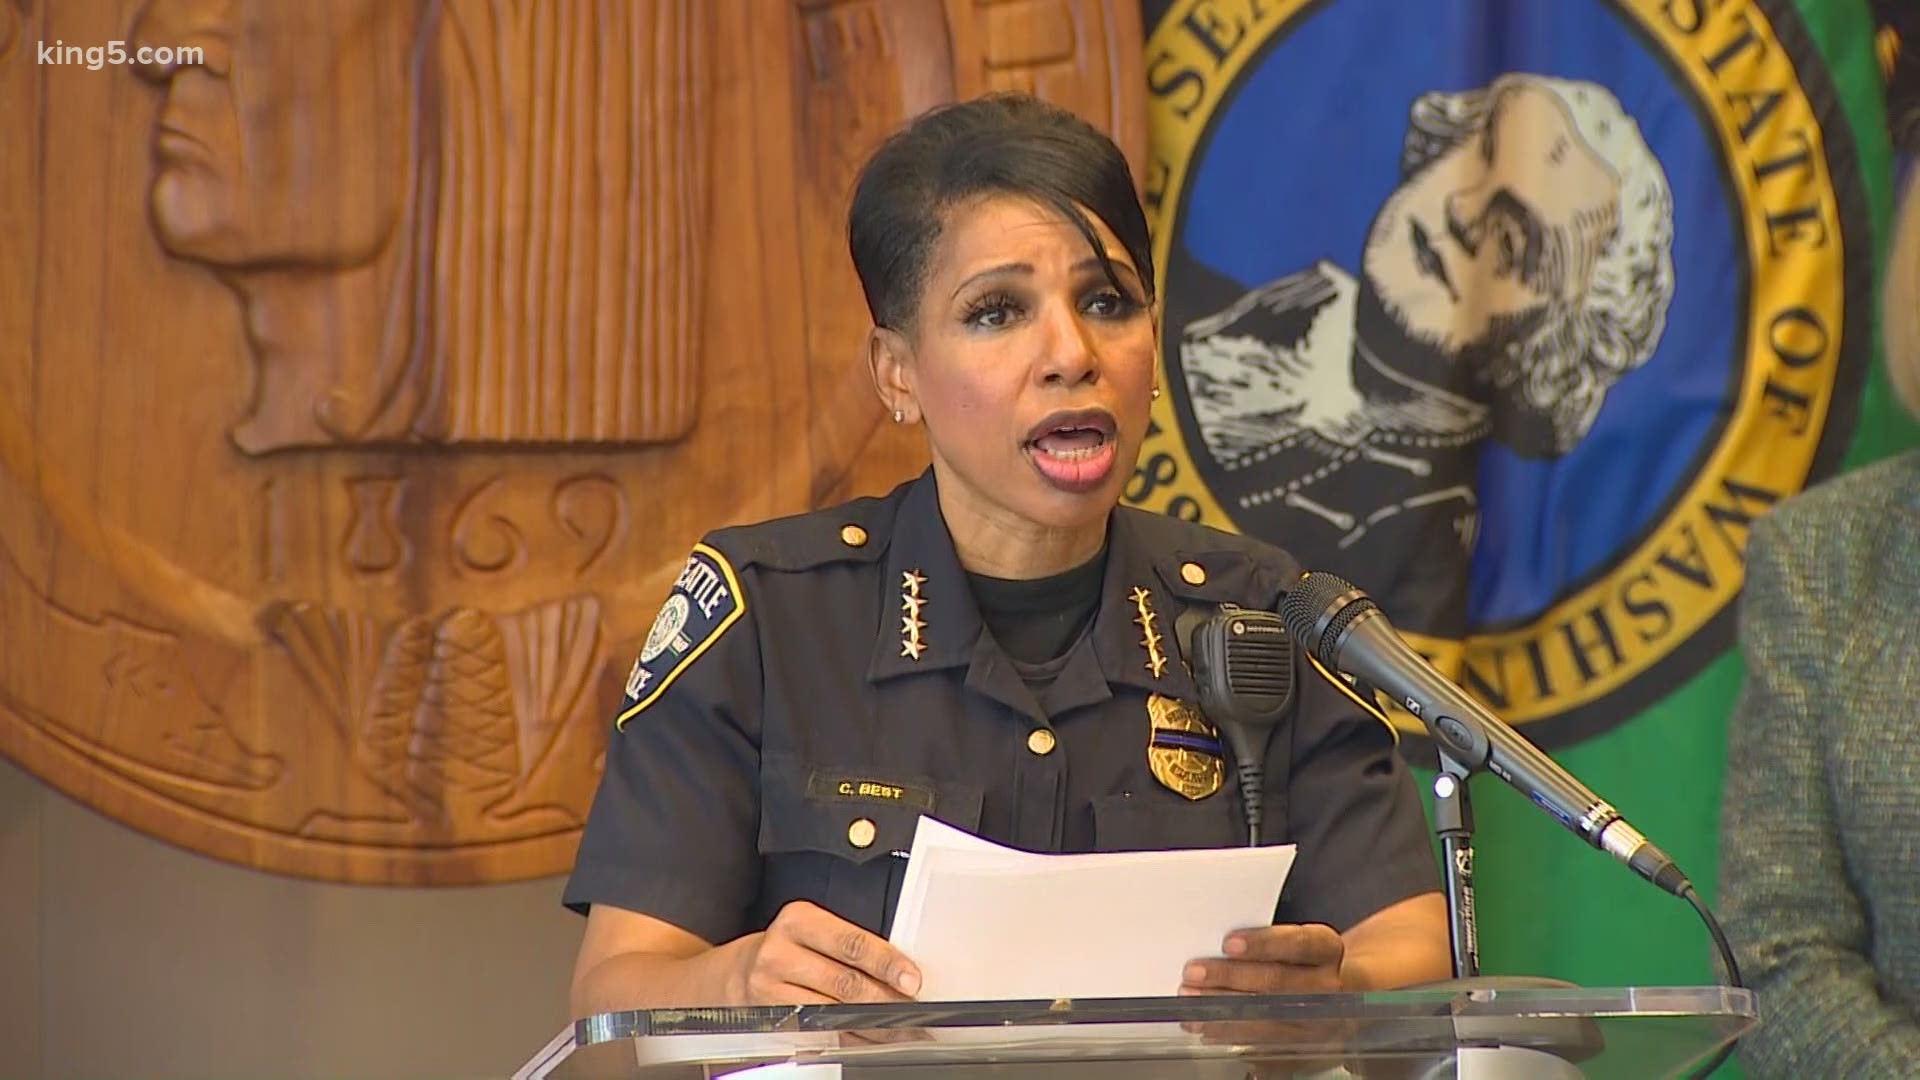 The use of tear gas will be temporarily suspended for the next 30 days, according to Seattle Police Chief Carmen Best. The change comes following calls for change.